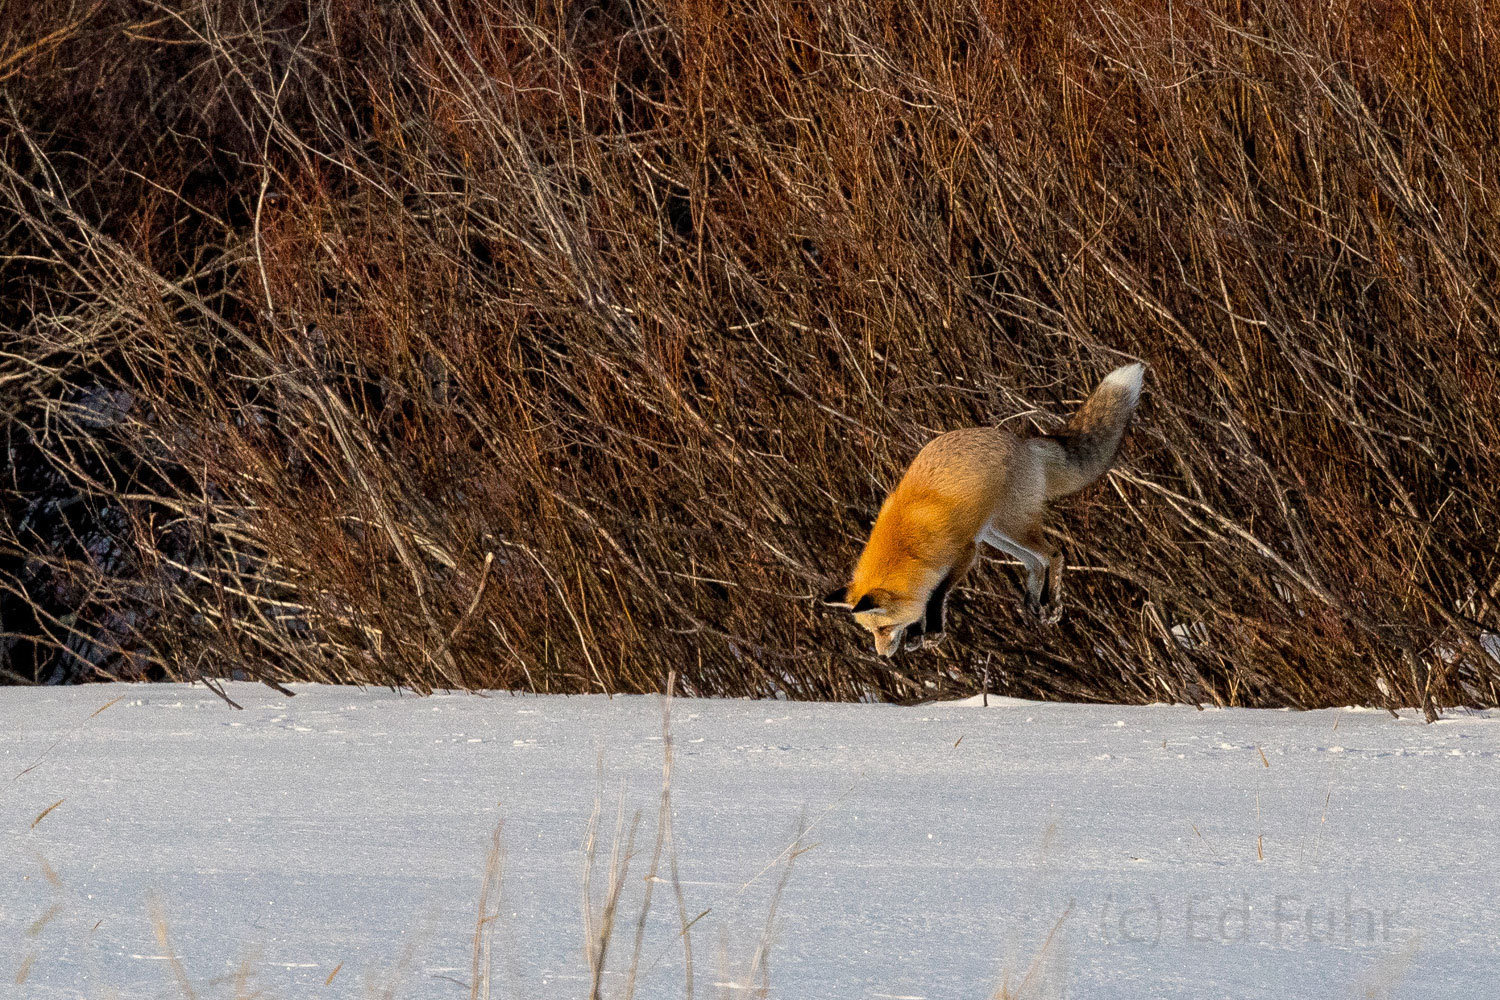 Straightening his dive, the fox prepares to hit mouth first.  He knows he must enter the snow like a high diver into the water...